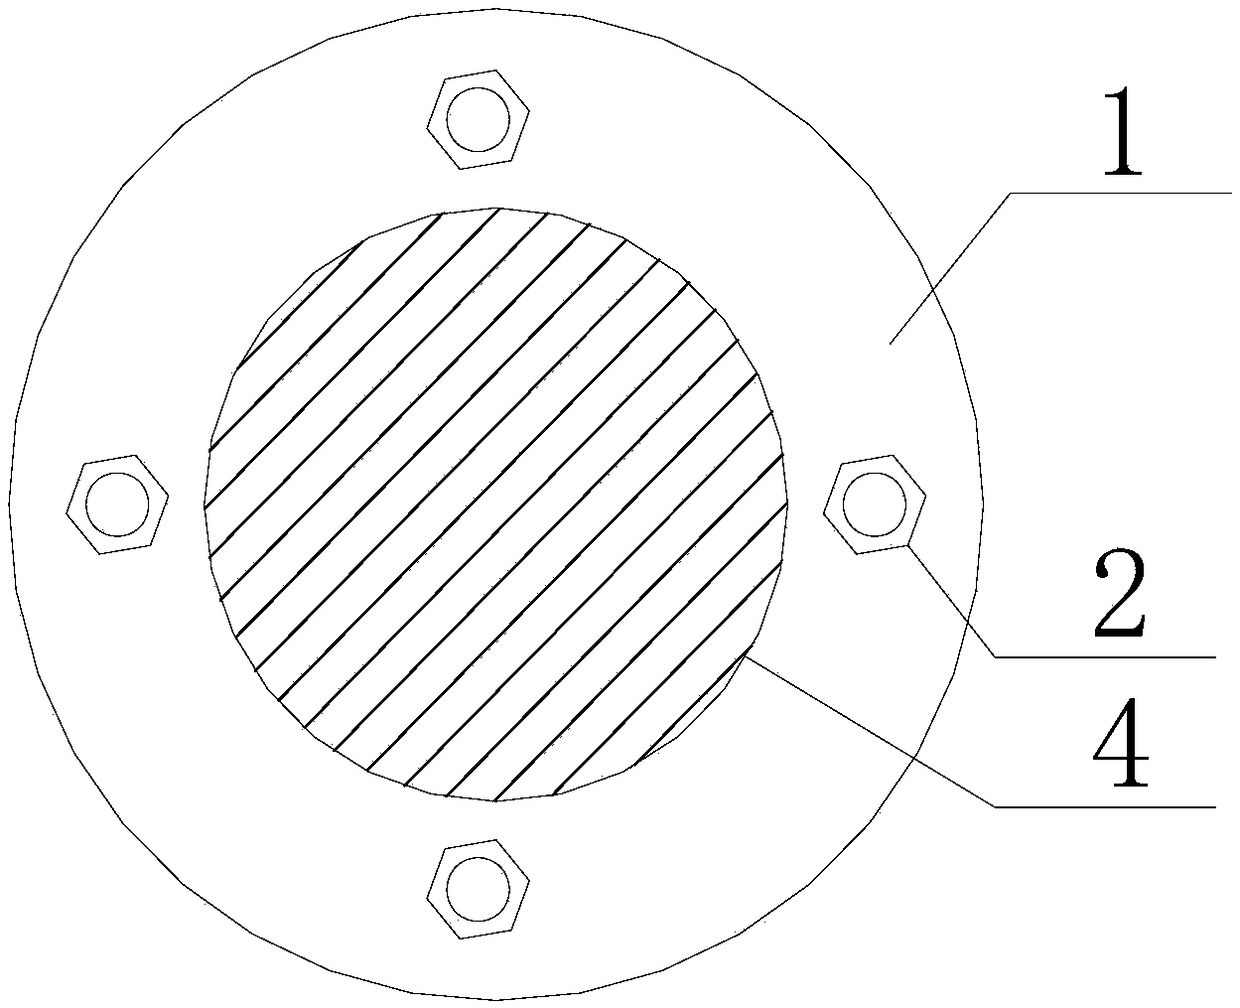 A high-damping rubber cylinder segmented damper with shape-memory alloy wire wrapped around it